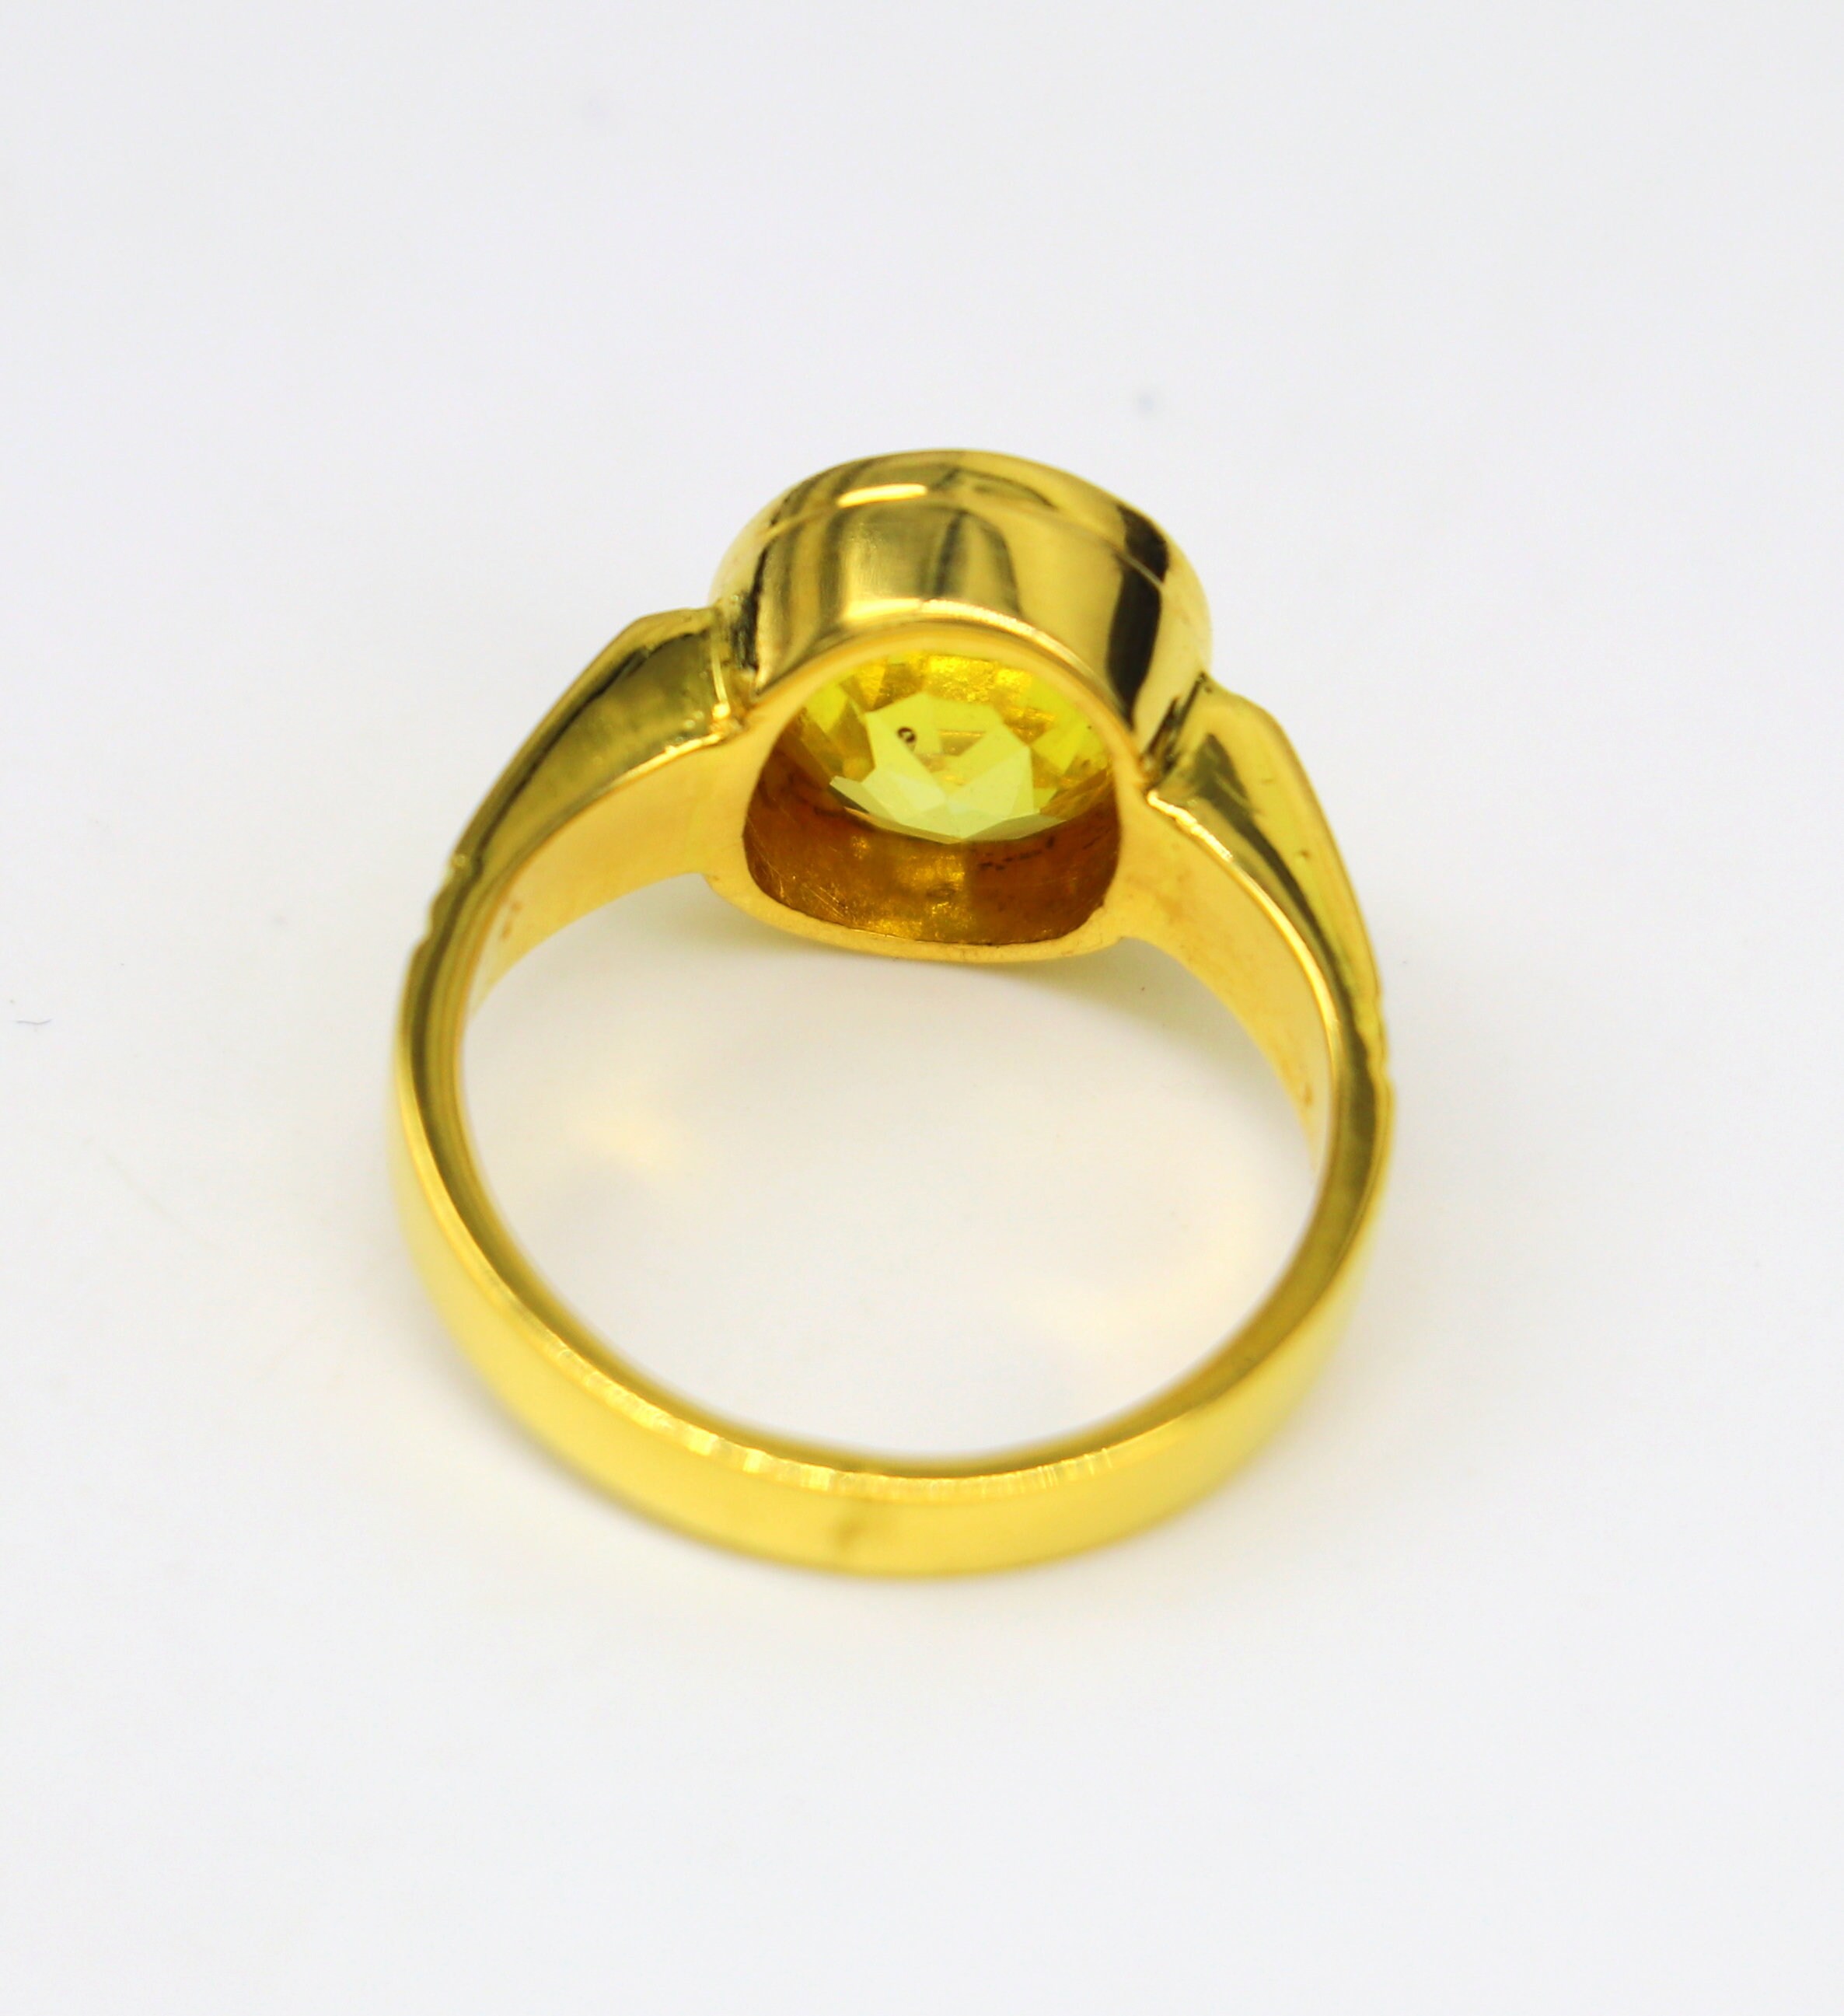 Yellow Gold Gemstone Fine Rings Ring 22k Metal Purity 7 Ring for sale | eBay